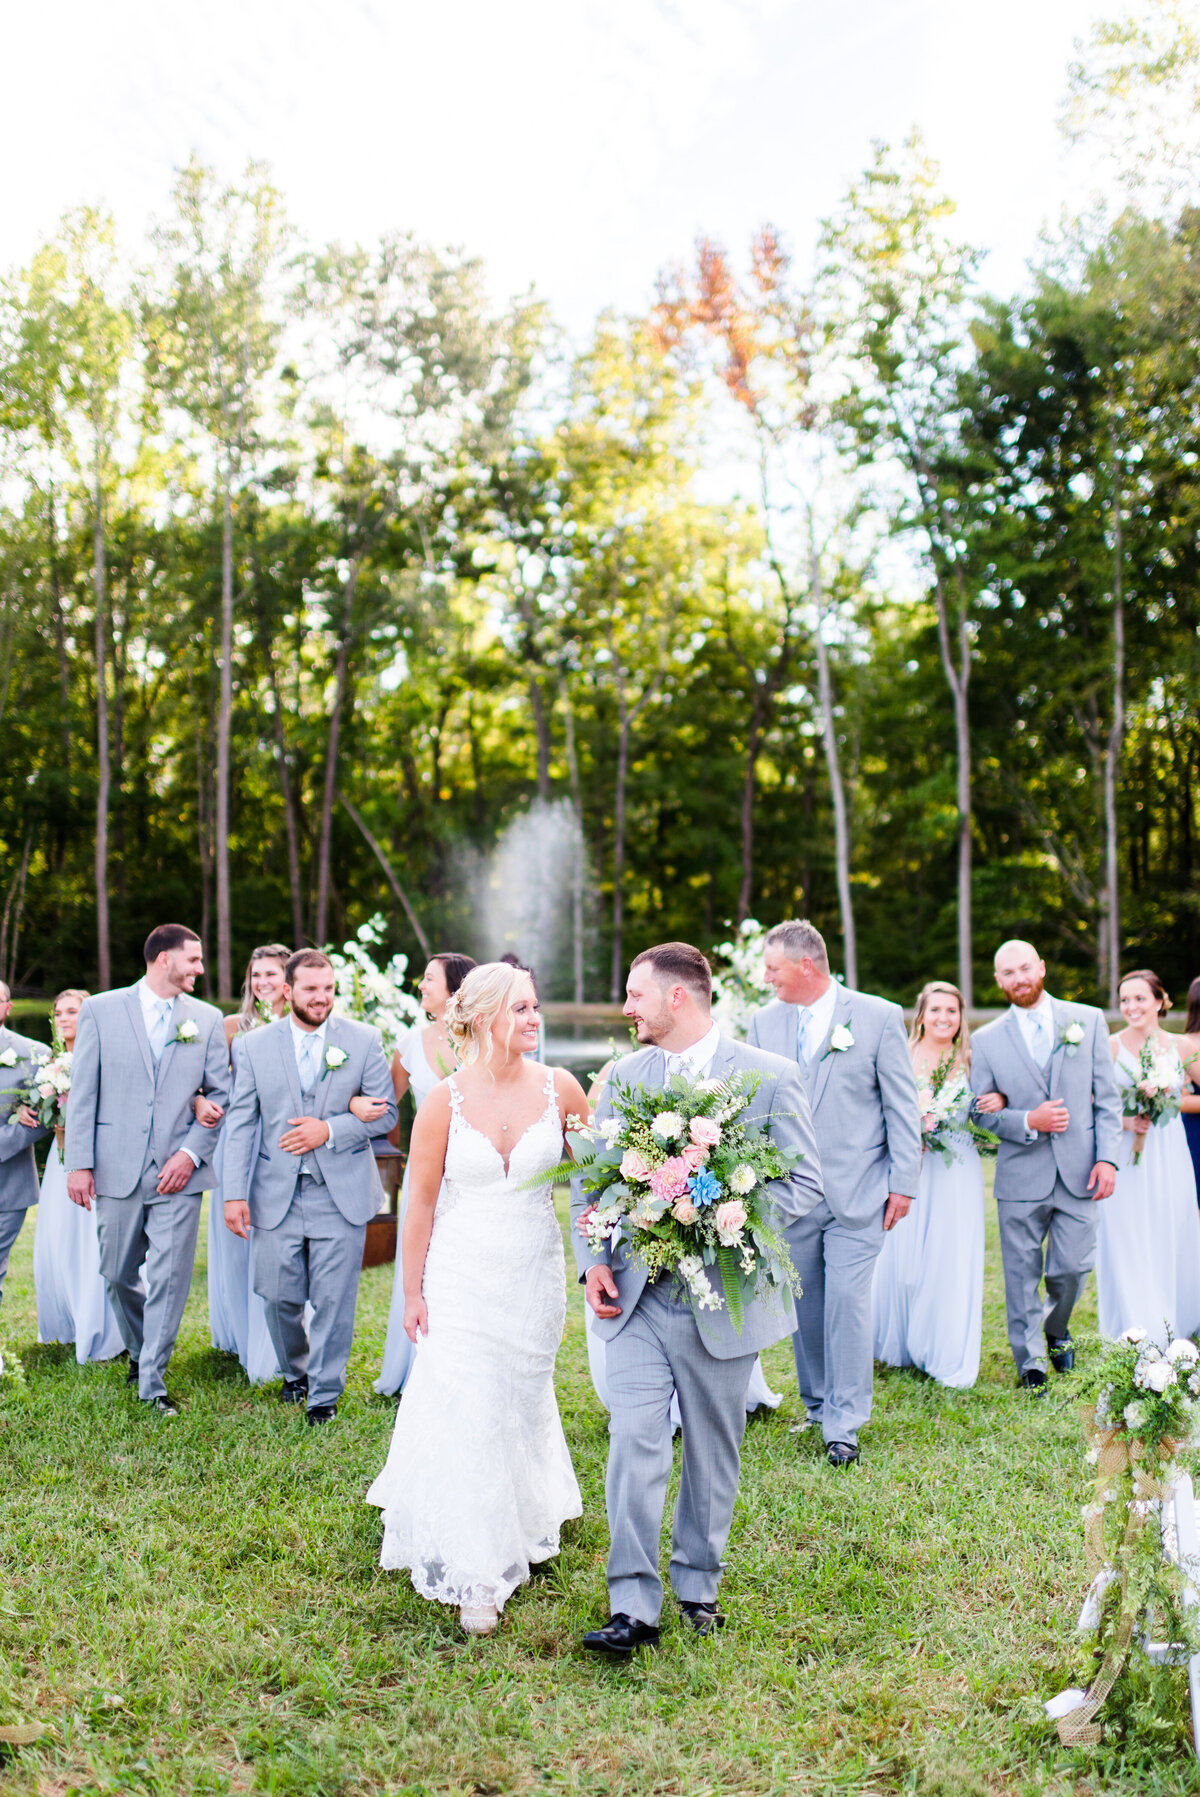 Courtney + Dylan's Wedding Day - Photography by Gerri Anna-592